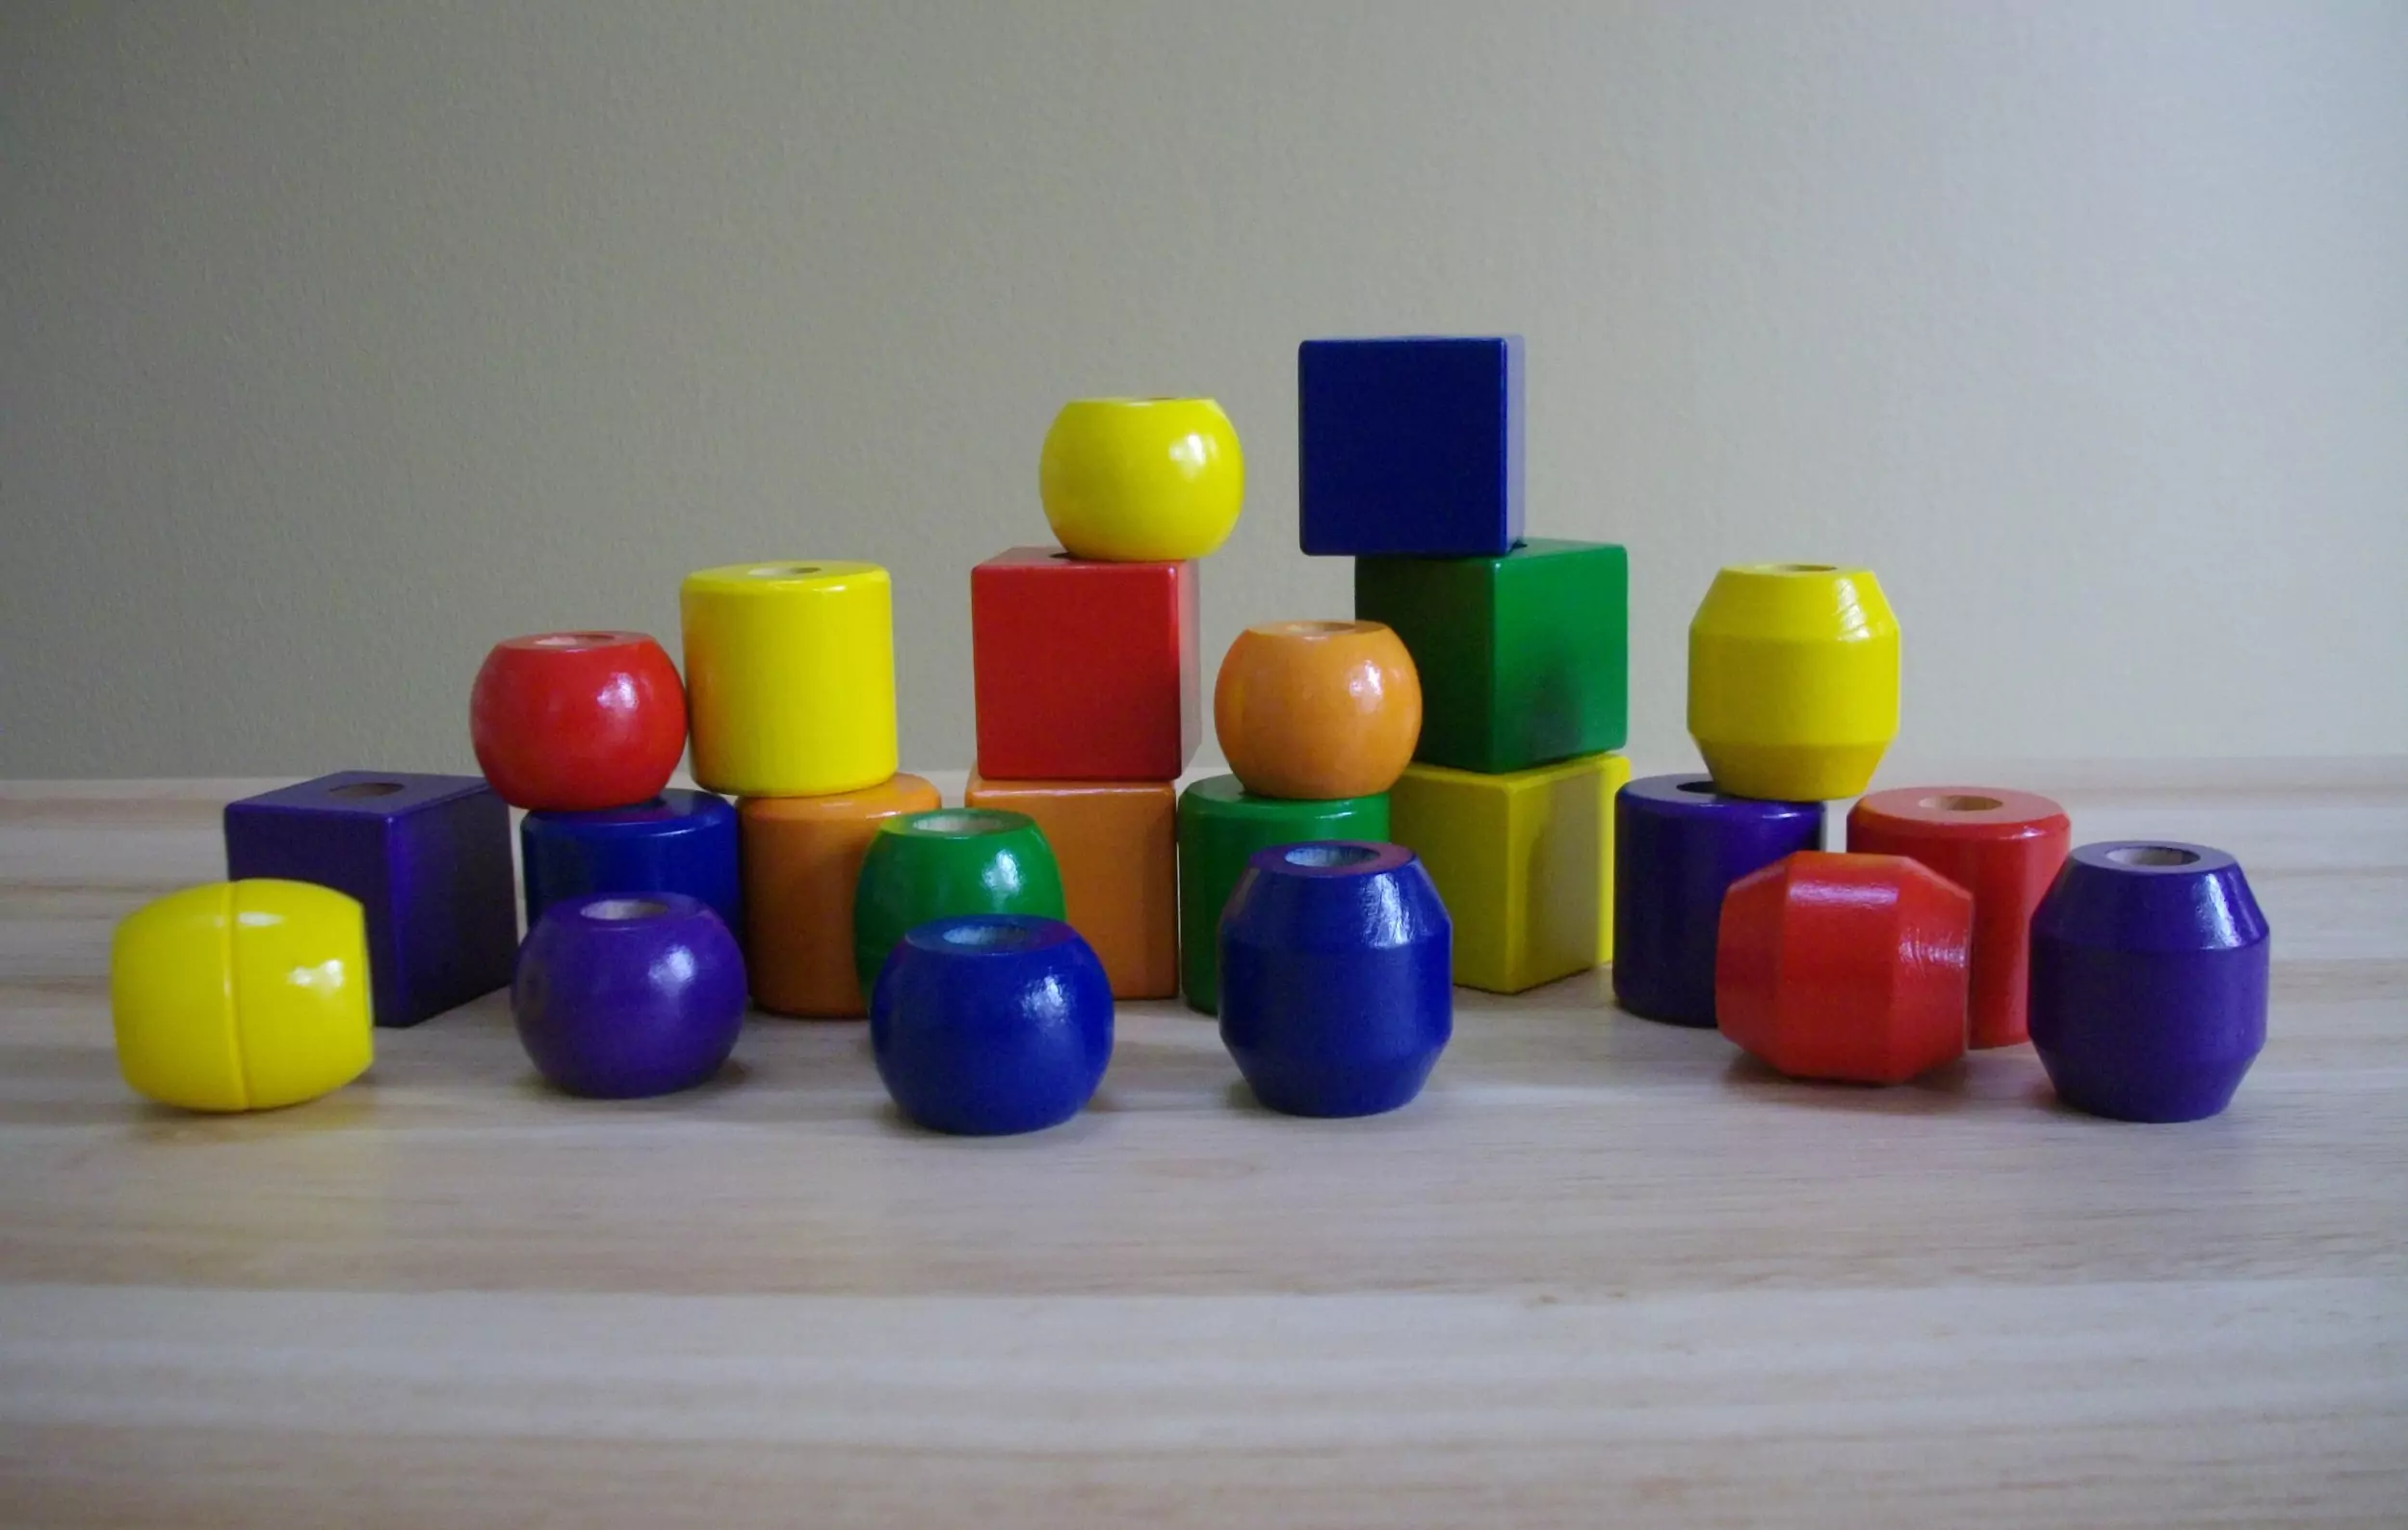 Cubes spheres cylindrical objects for montessori education